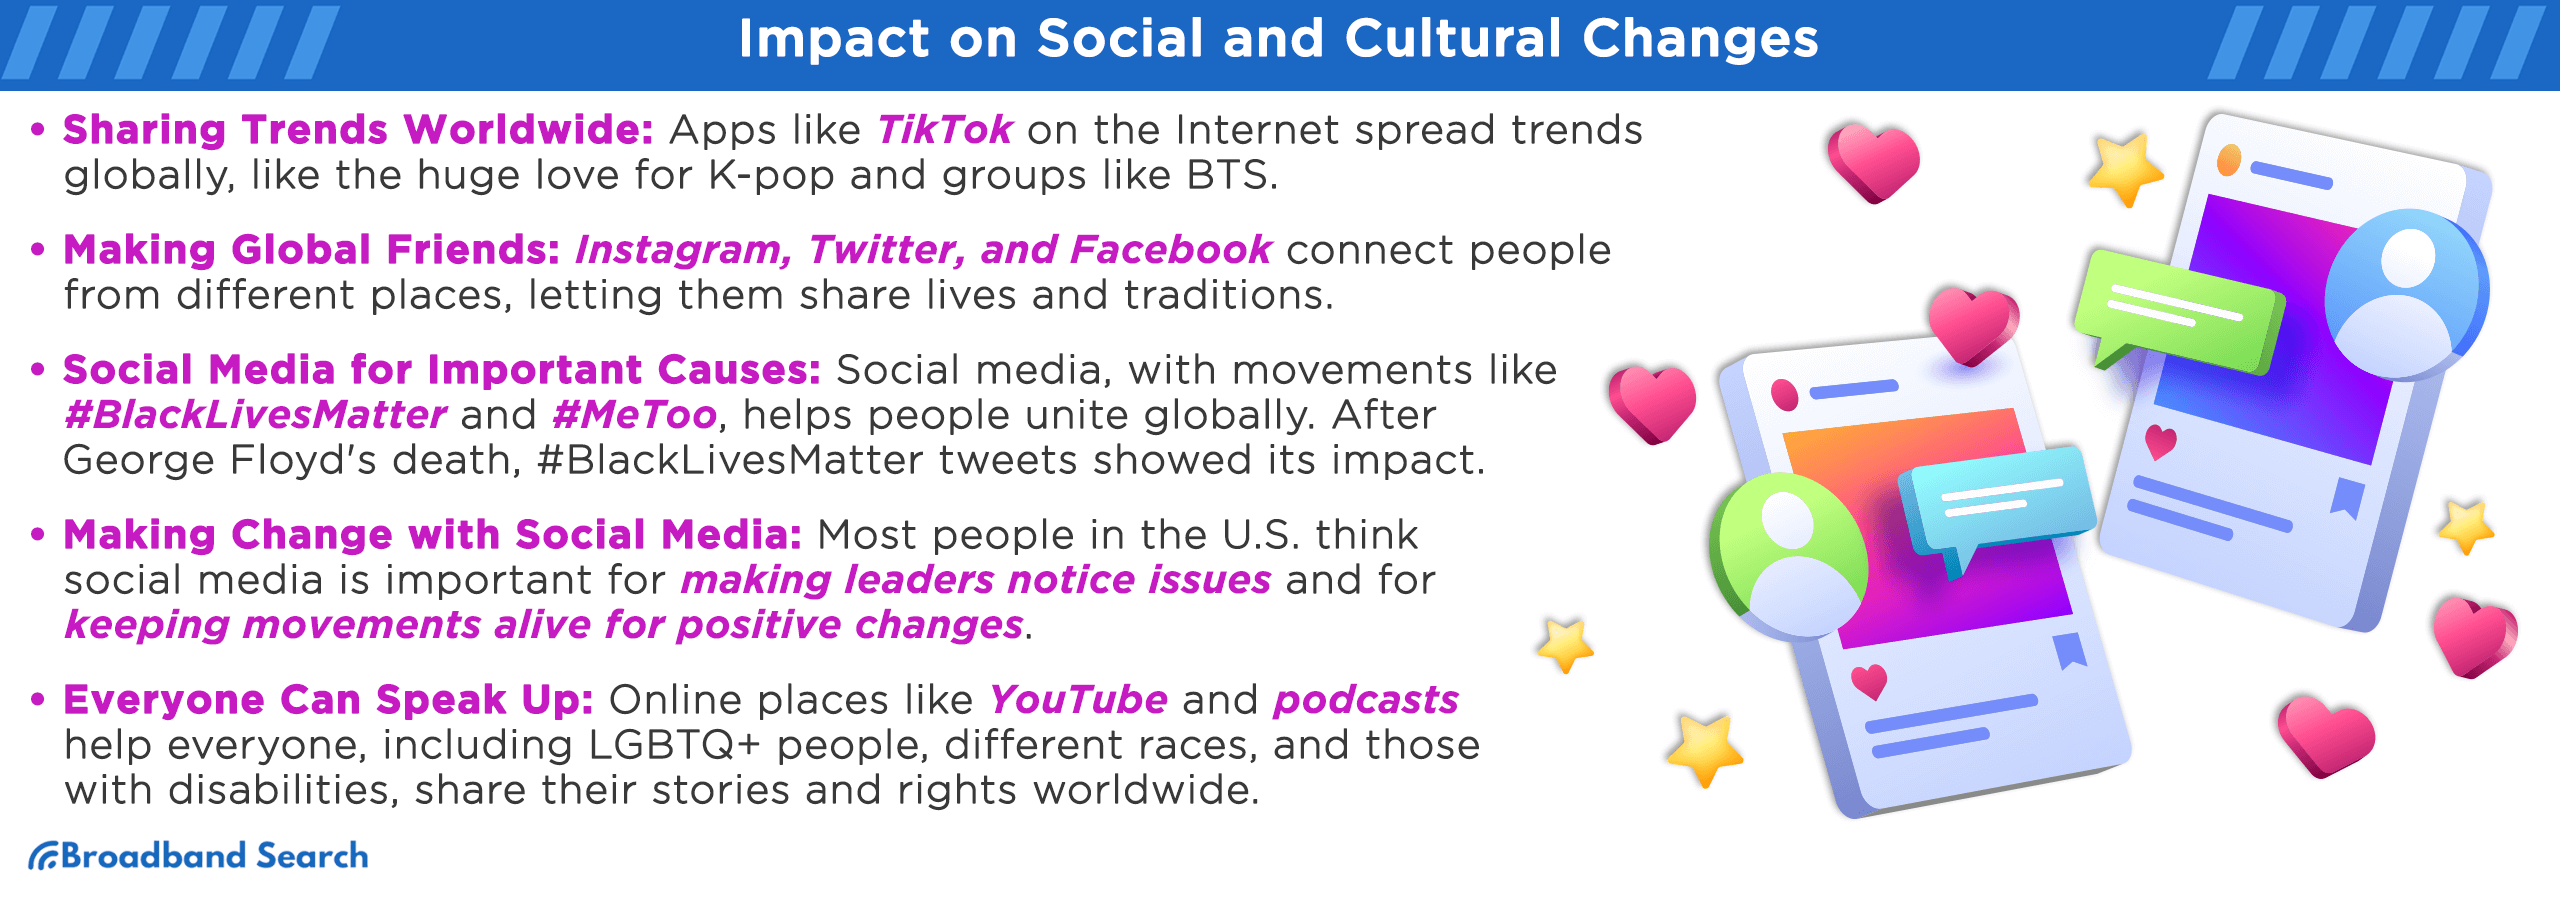 Impact on Social and Cultural changes